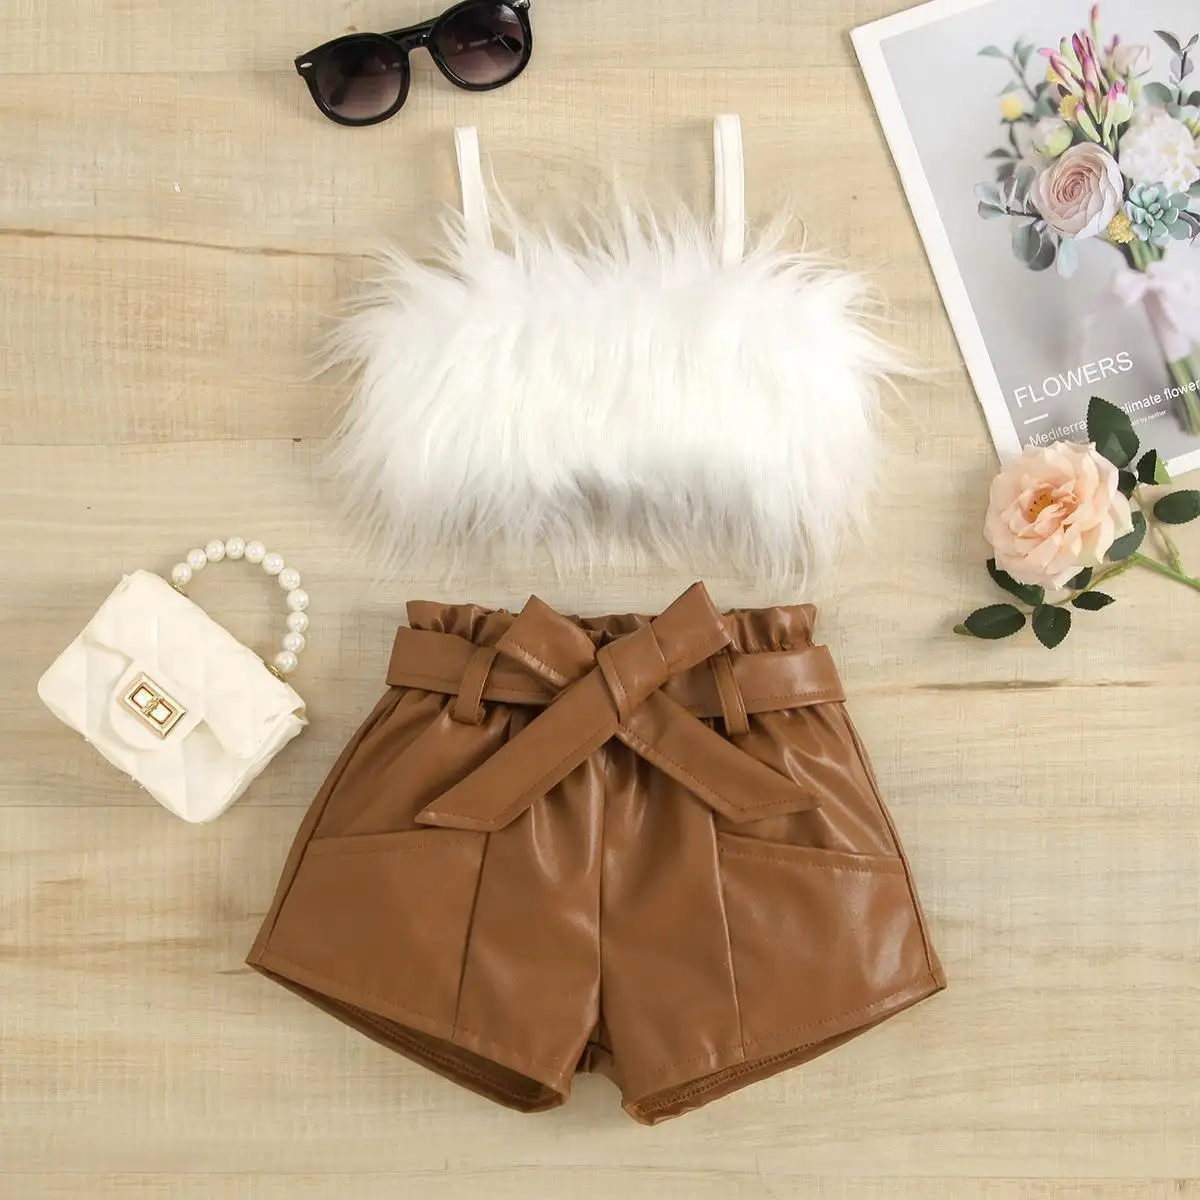 2022 Fashion Summer Girls Clothing Sets Kids Strap Fluffy Fur Feather Vest PU Leather Belt Shorts 2 Pcs Outfit